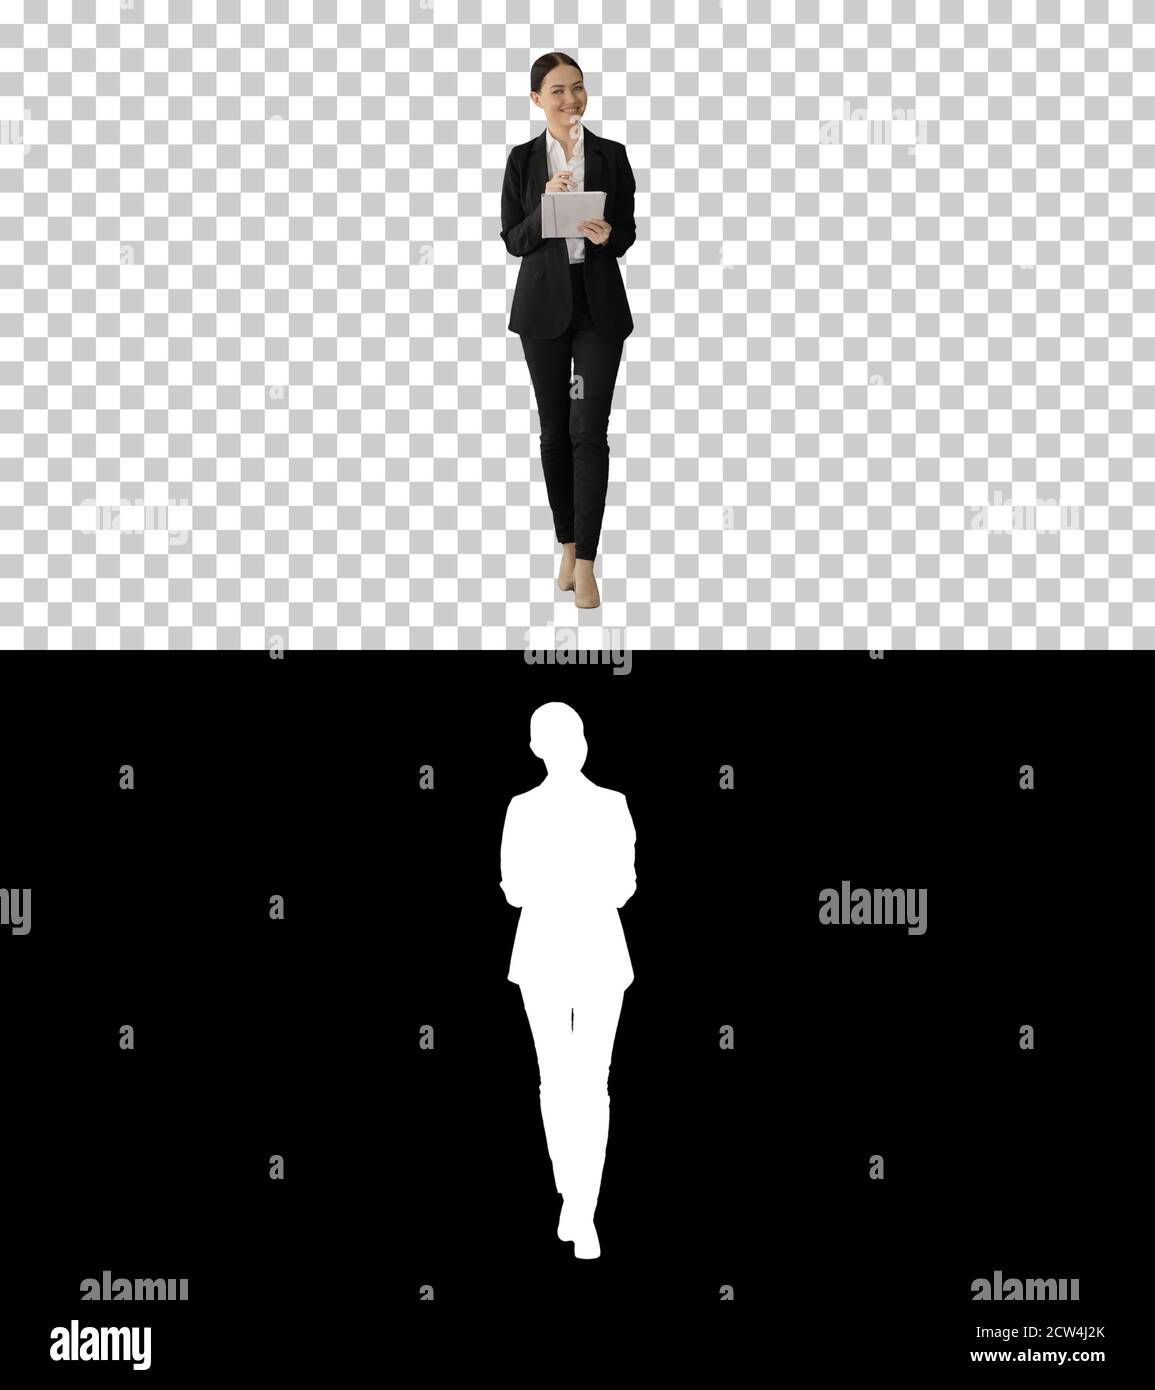 Smiling Businesswoman using computer pad while walking towards t Stock Photo